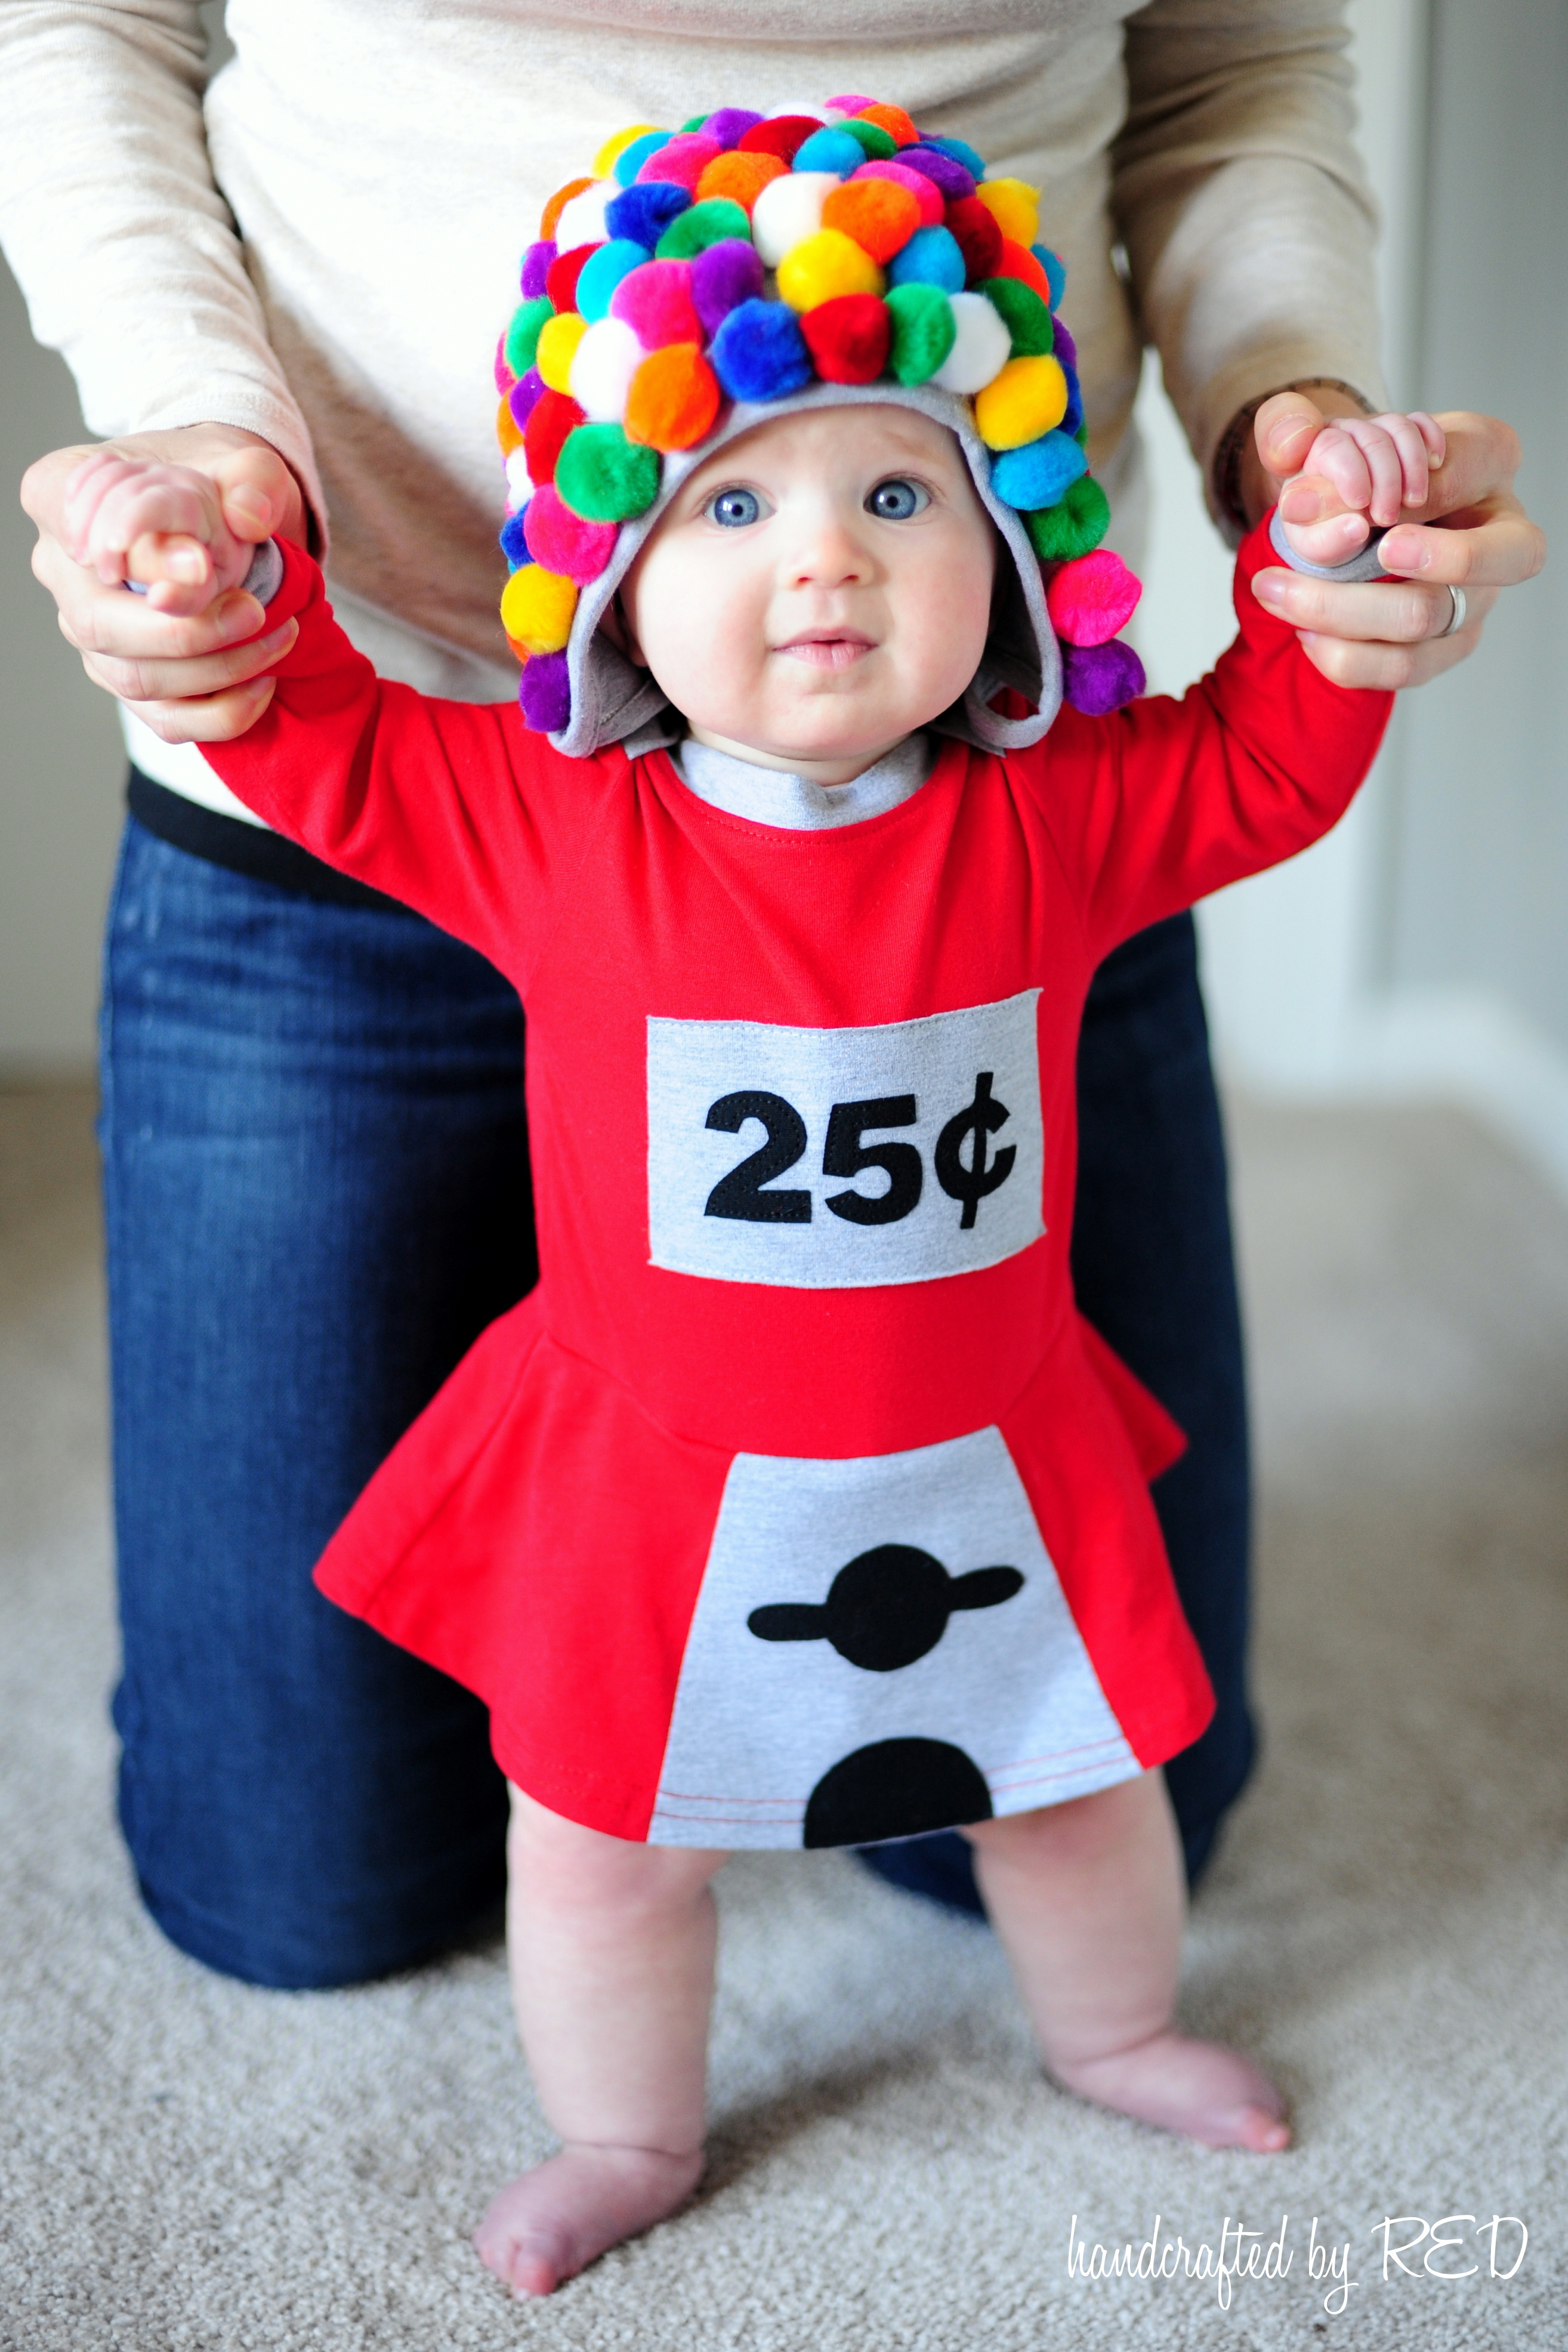 DIY Gumball Costume
 DIY Baby Gumball Machine Costume Peek a Boo Pages